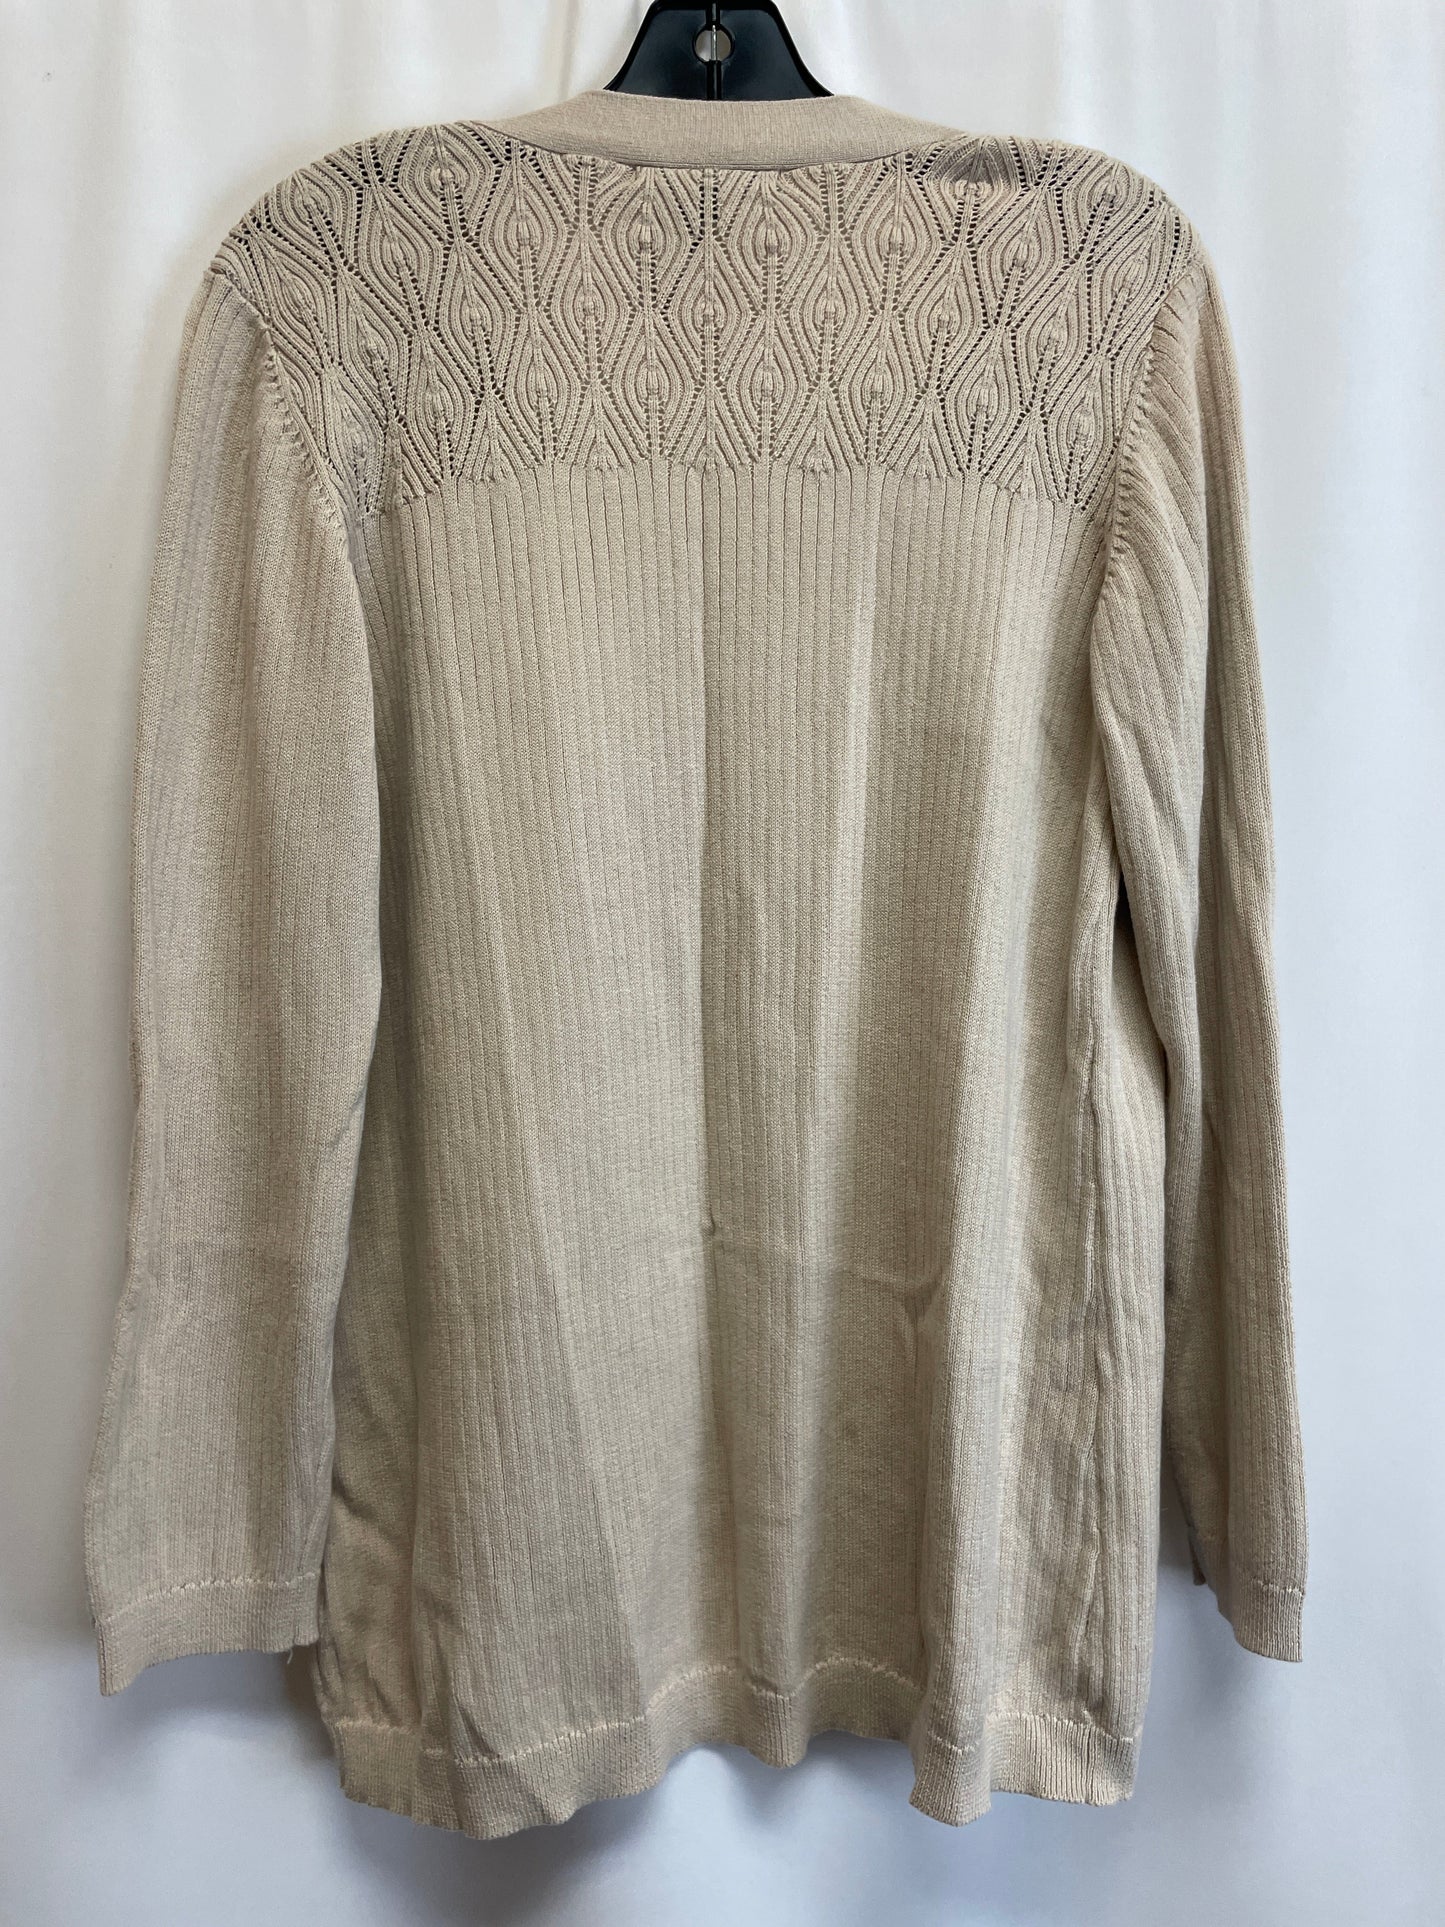 Sweater Cardigan By 89th And Madison  Size: L